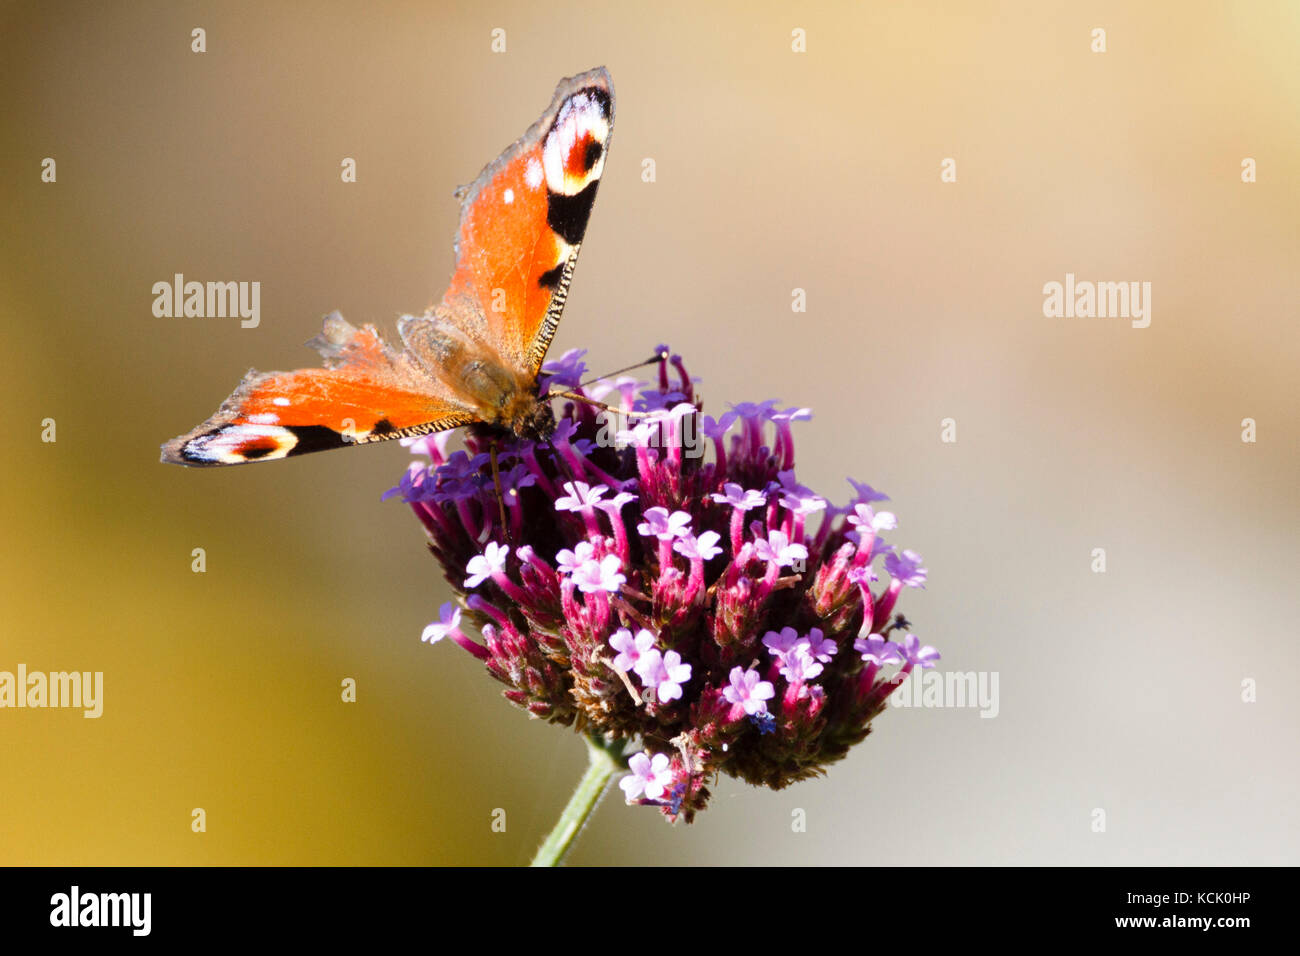 6th Oct 2017. UK weather. A Peacock butterfly (Aglais io) feasts on a Verbena plant in the morning sun in East Sussex, UK Credit: Ed Brown/Alamy Live News Stock Photo